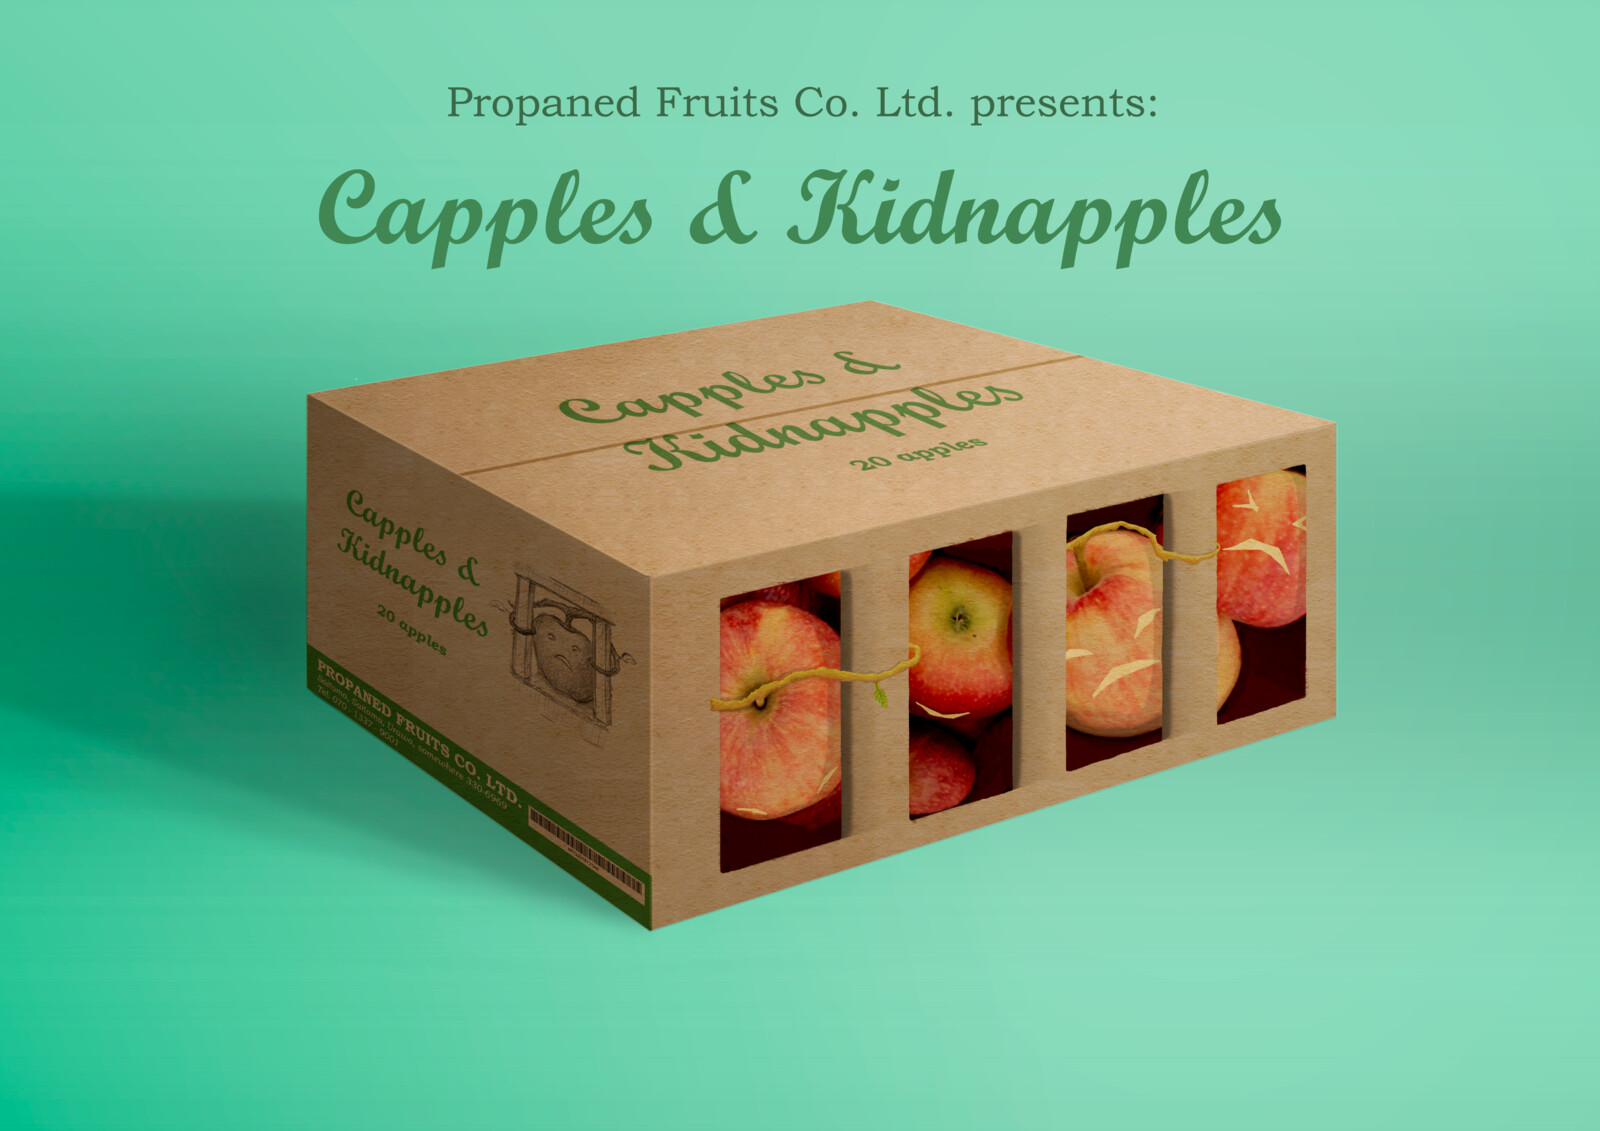 Credits:
Ms. Y - stolen apples, stolen soul
Vectorium (Freepik) - box PSD template
Mr. T - Box with cage bars, made in Adobe Illustrator